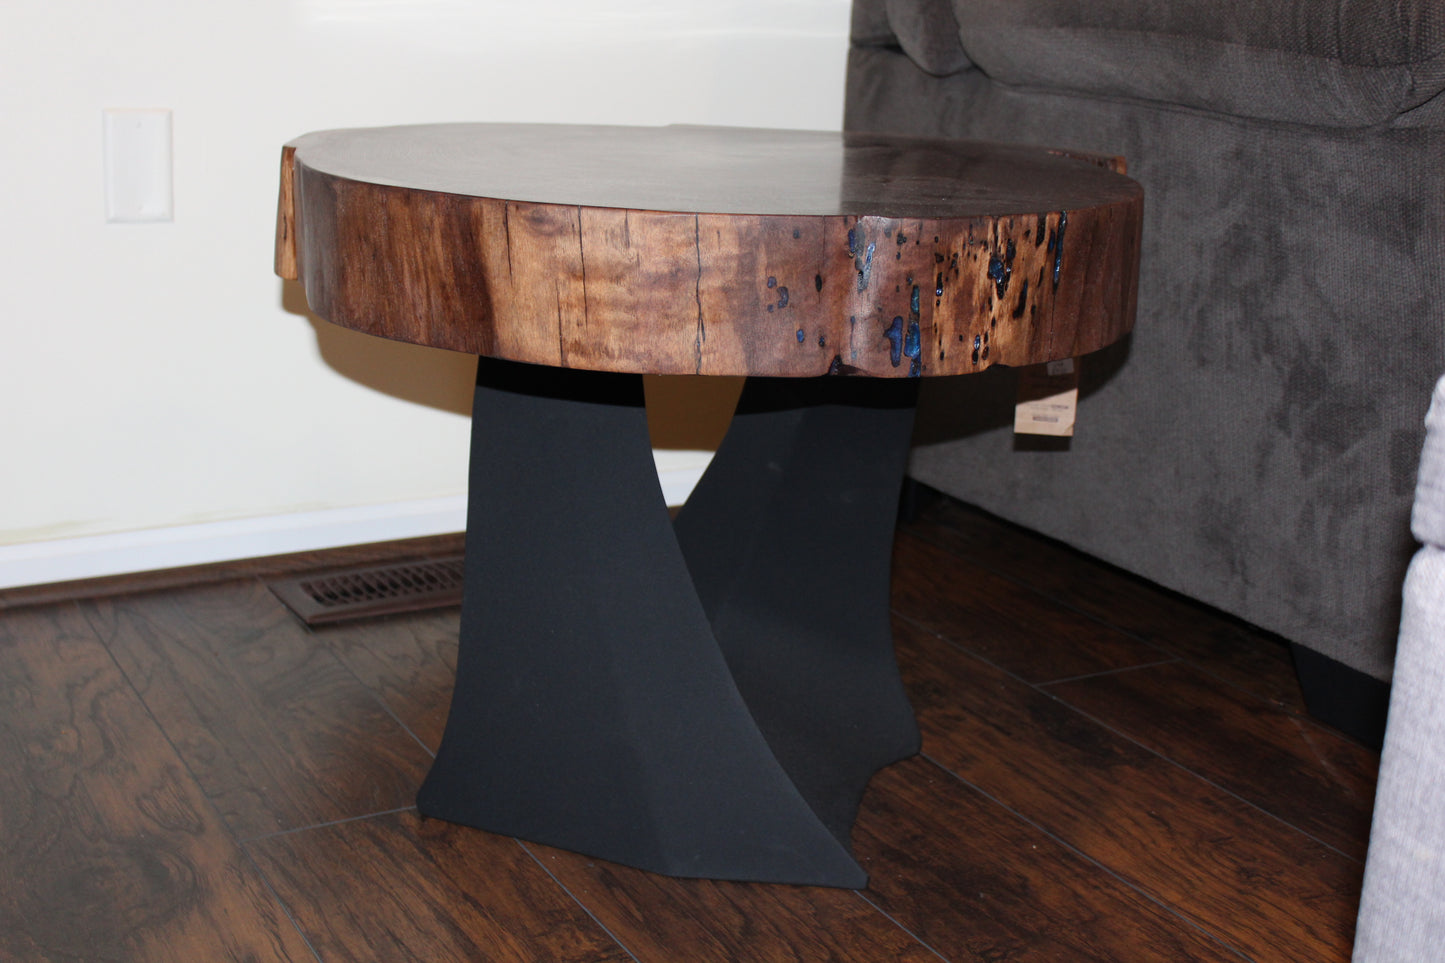 Walnut coffee table with live edges.